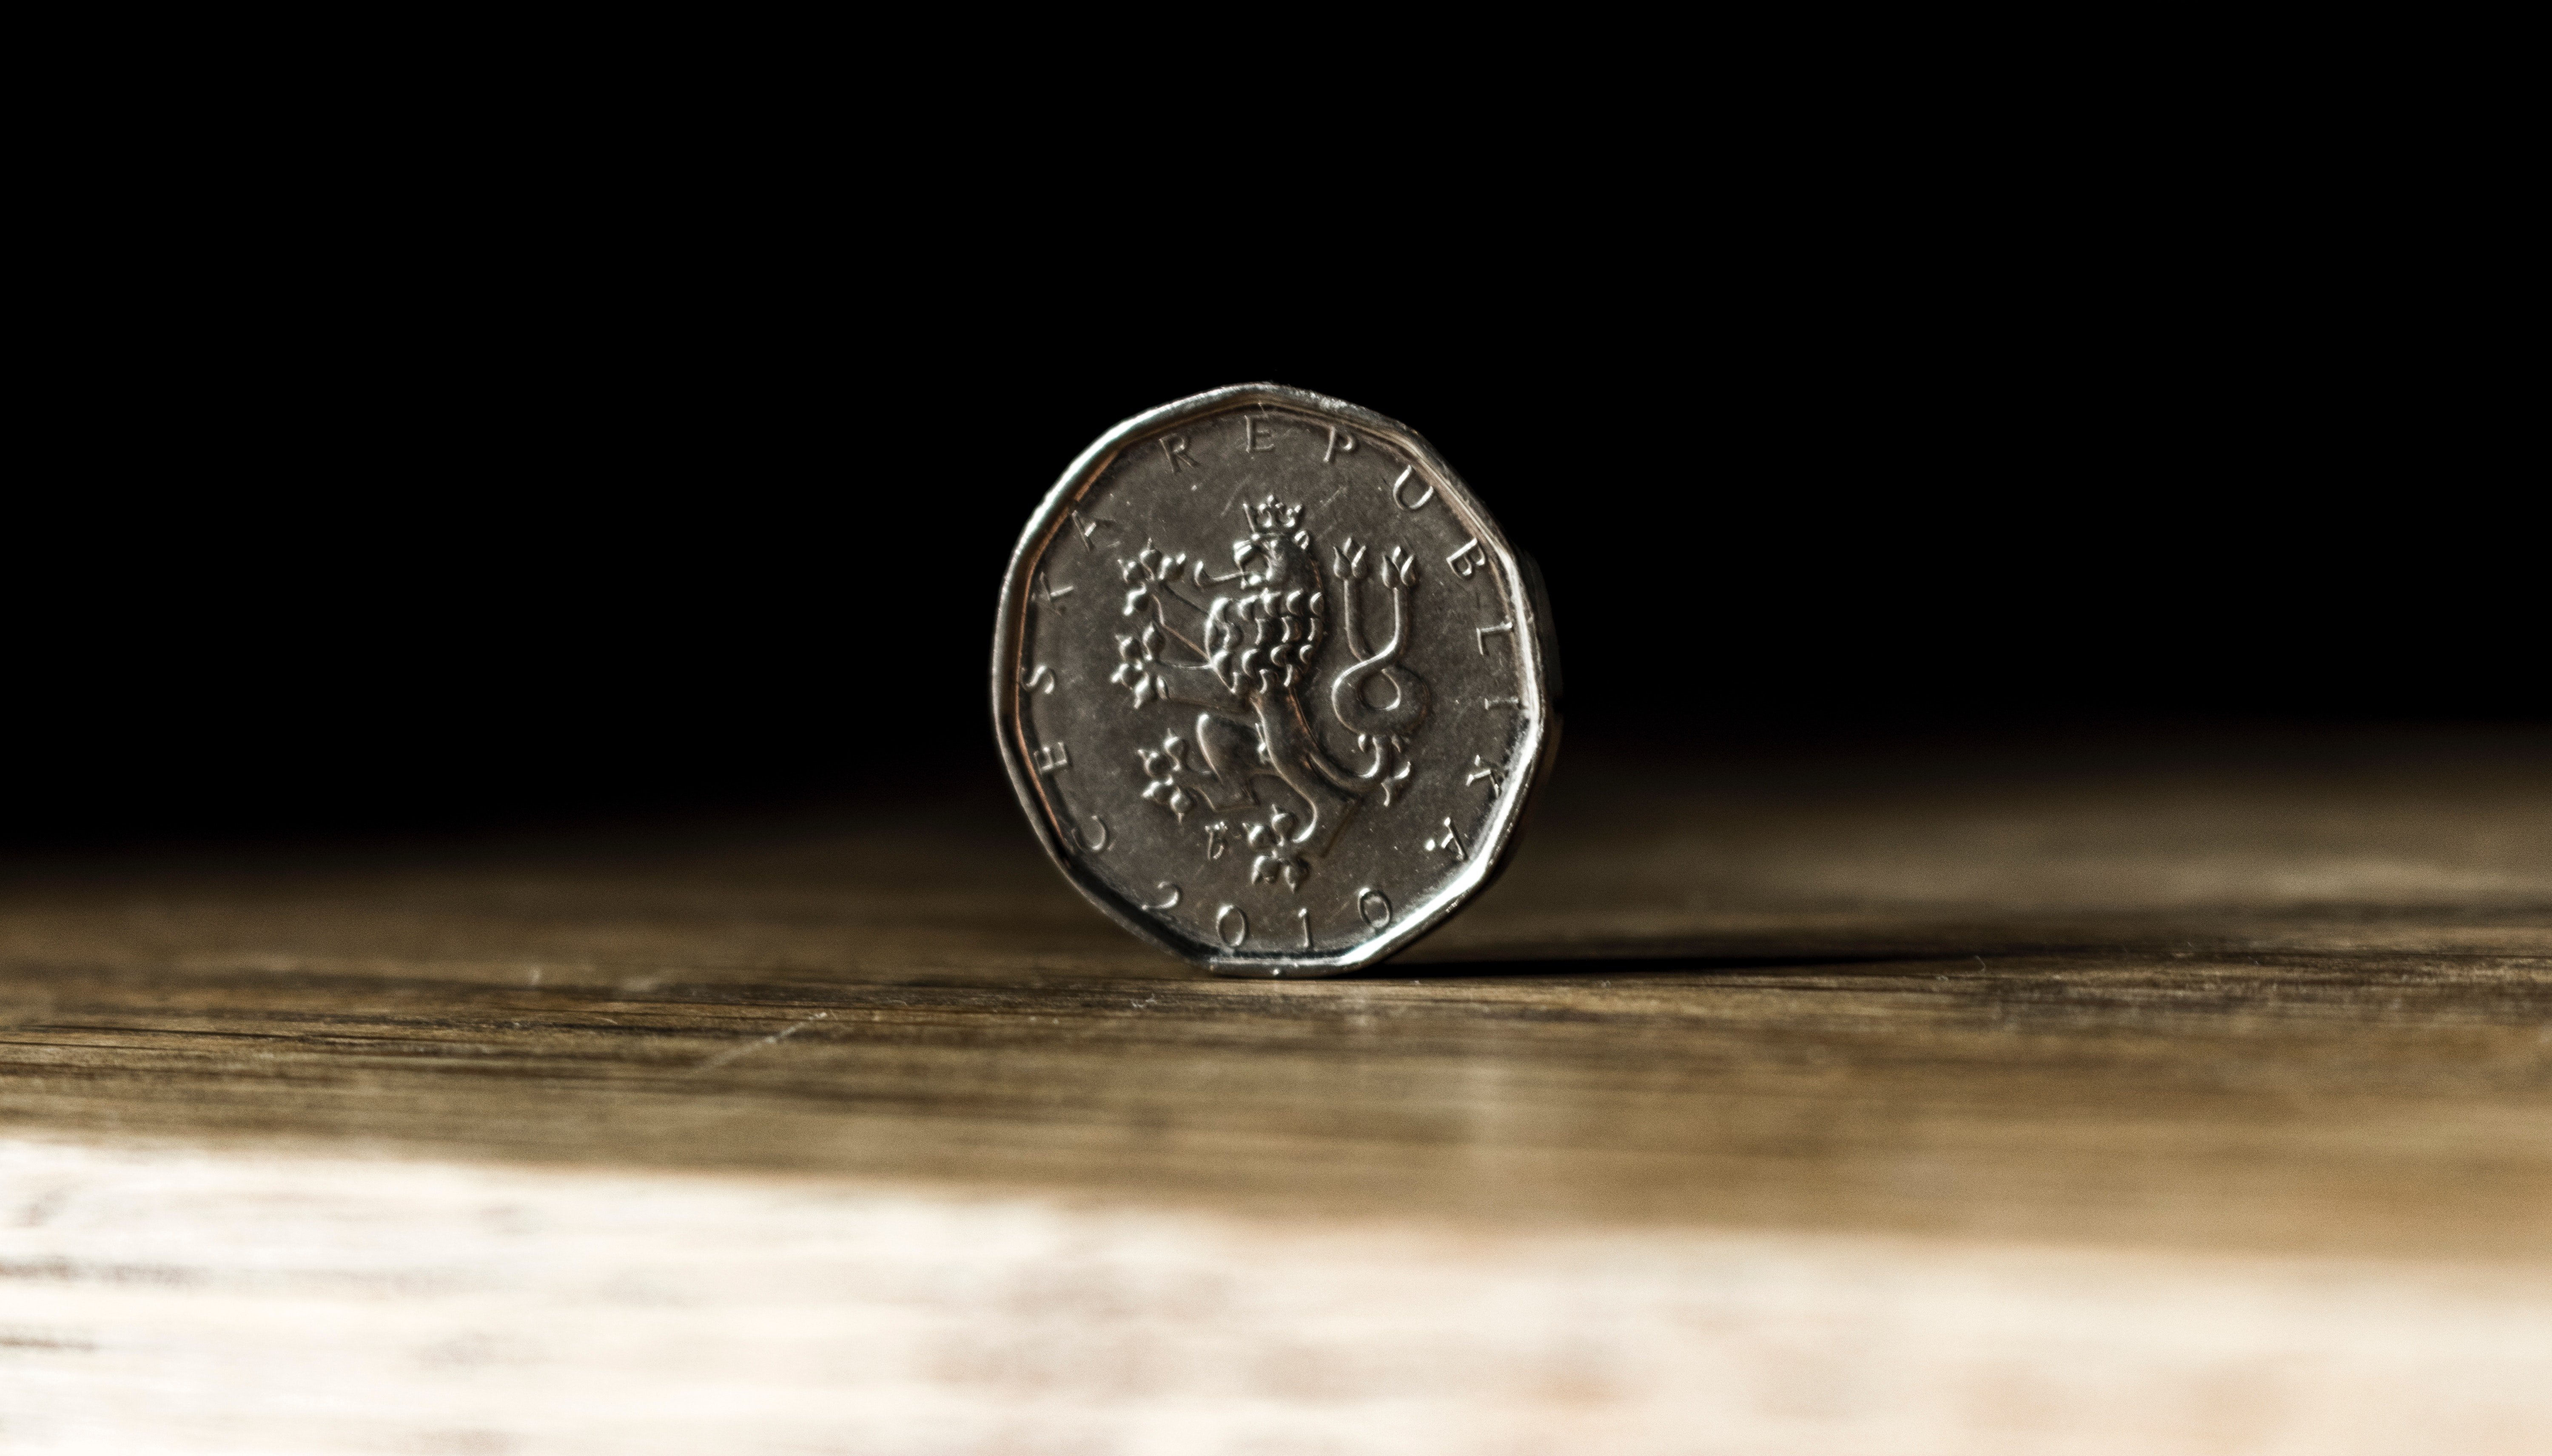 A coin standing on it edges | Source: Pexels